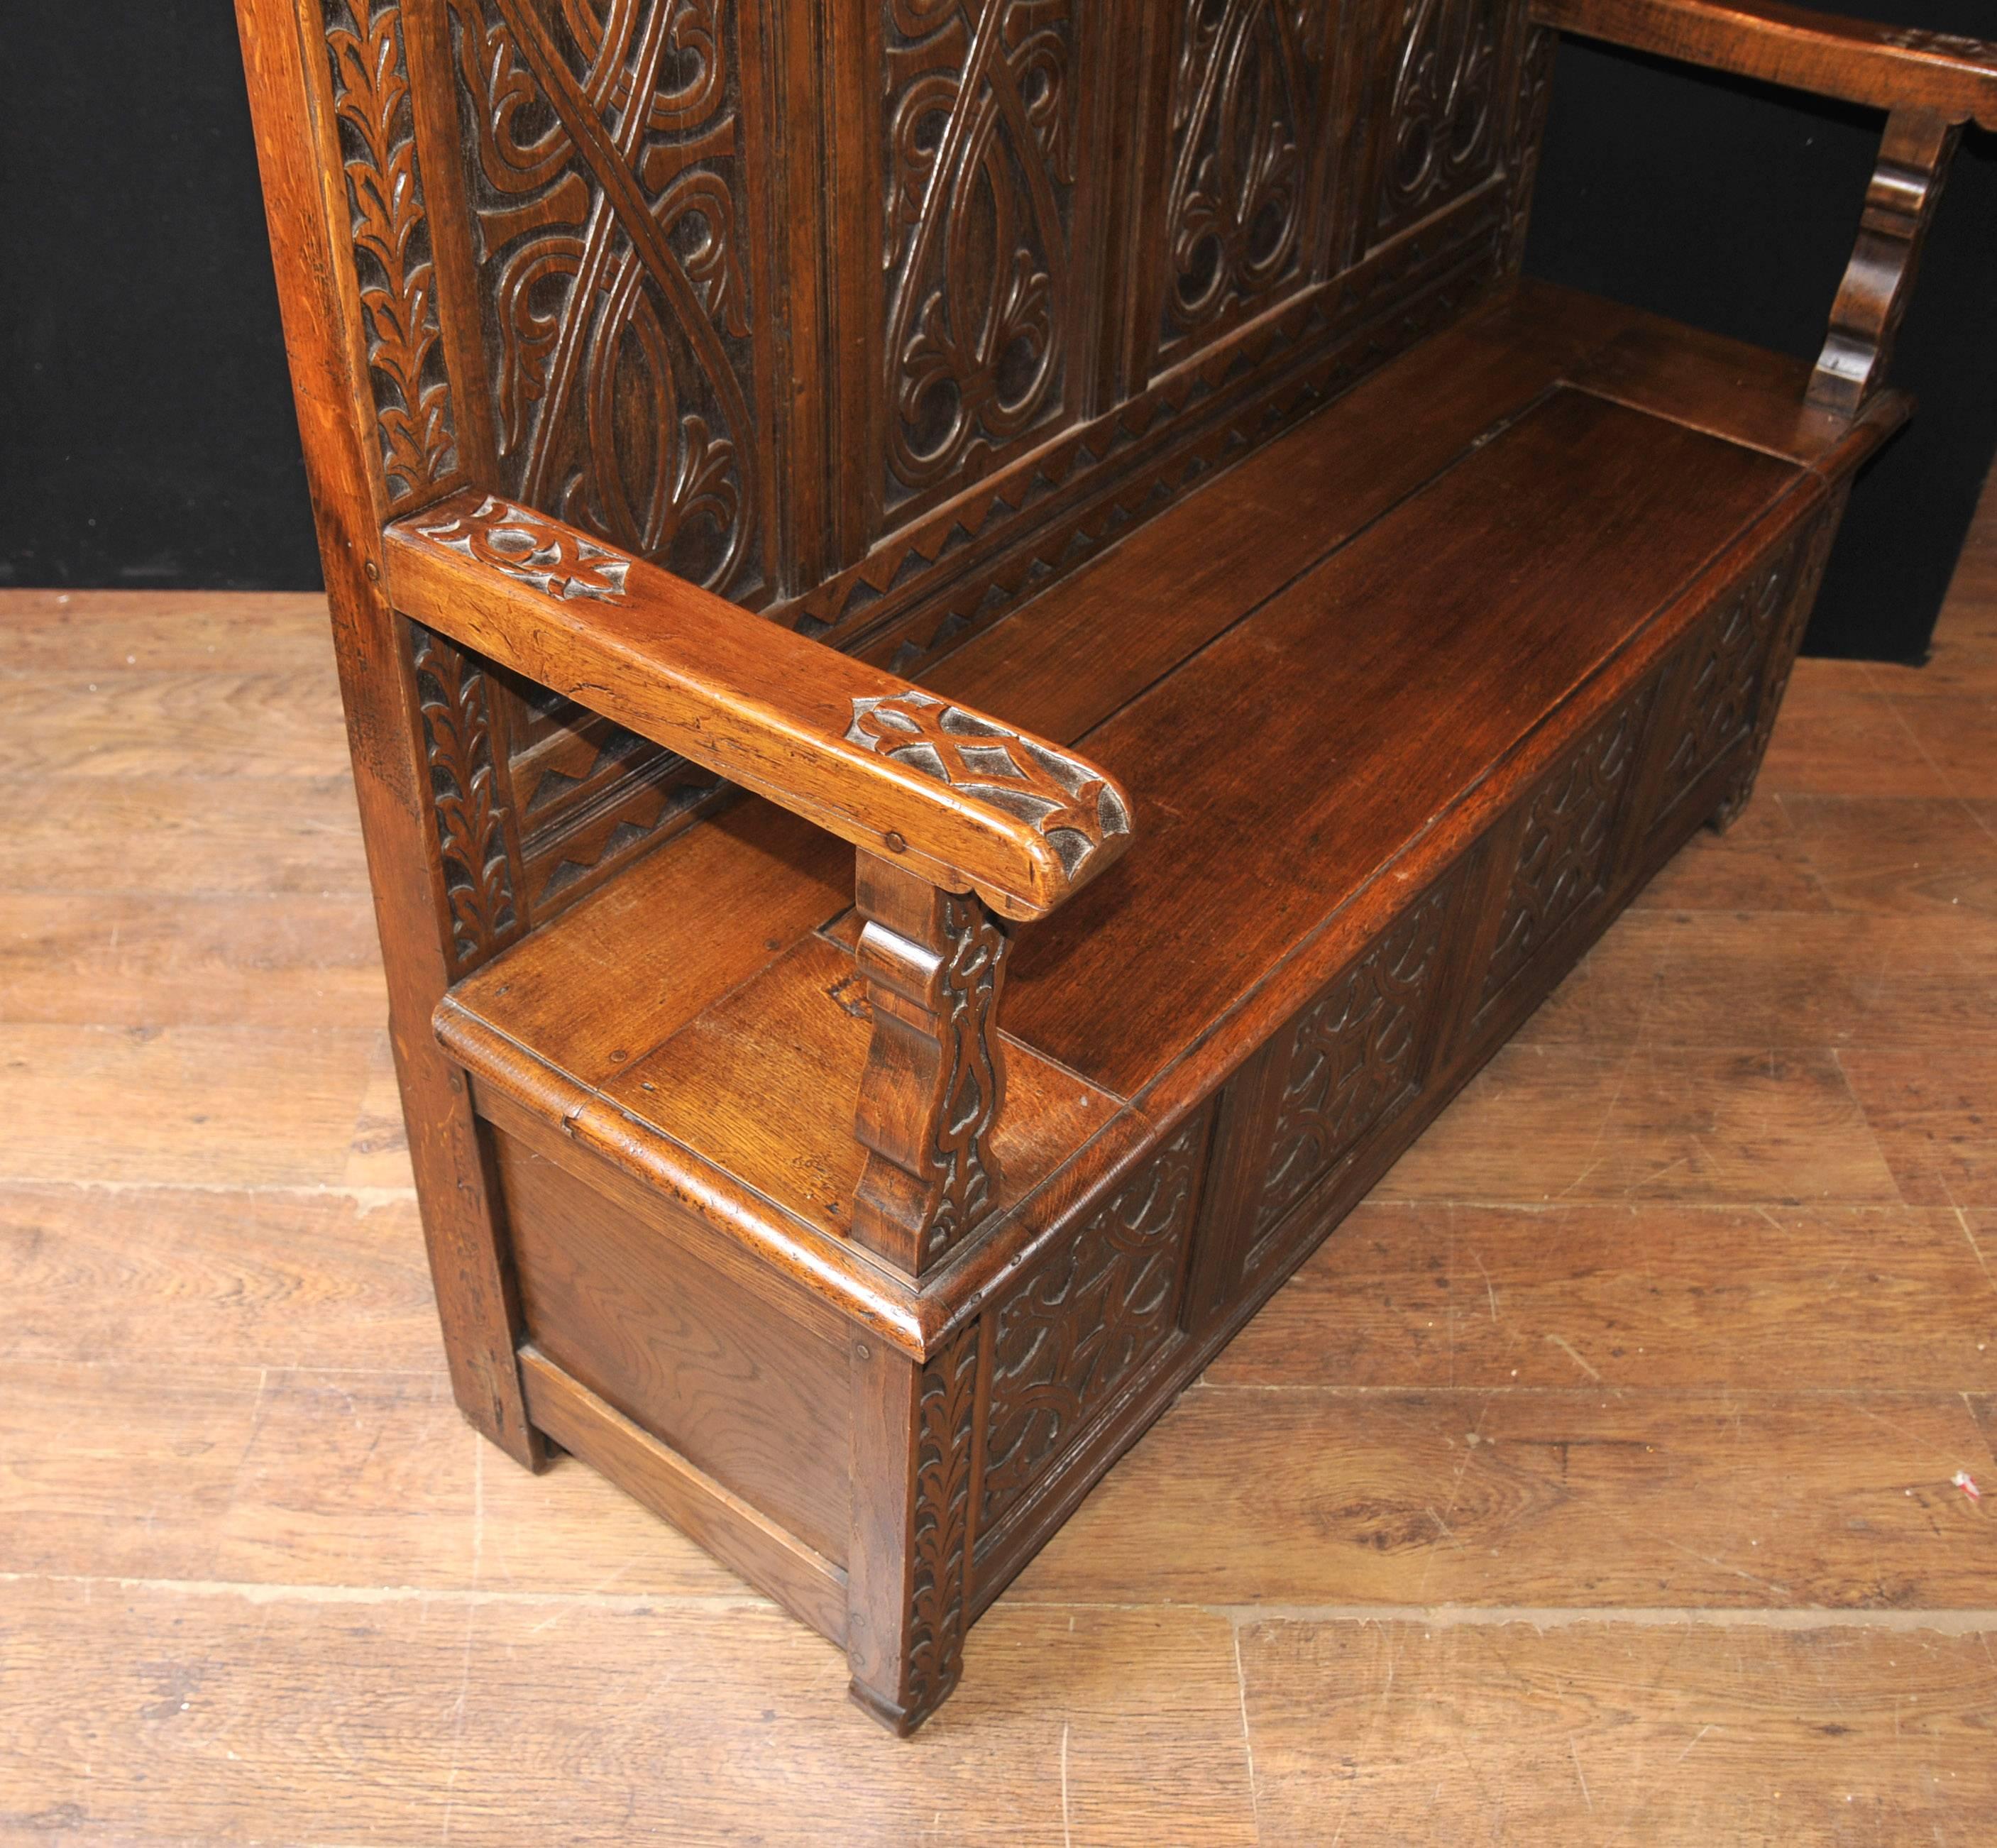 Antique 19th century hand-carved oak monks bench or settle.
Stunning work of an architectural quality.
We date this to the early 1800s and it really was quite a find.
The hand-carved details are amazing, with various Celtic motifs verging on the